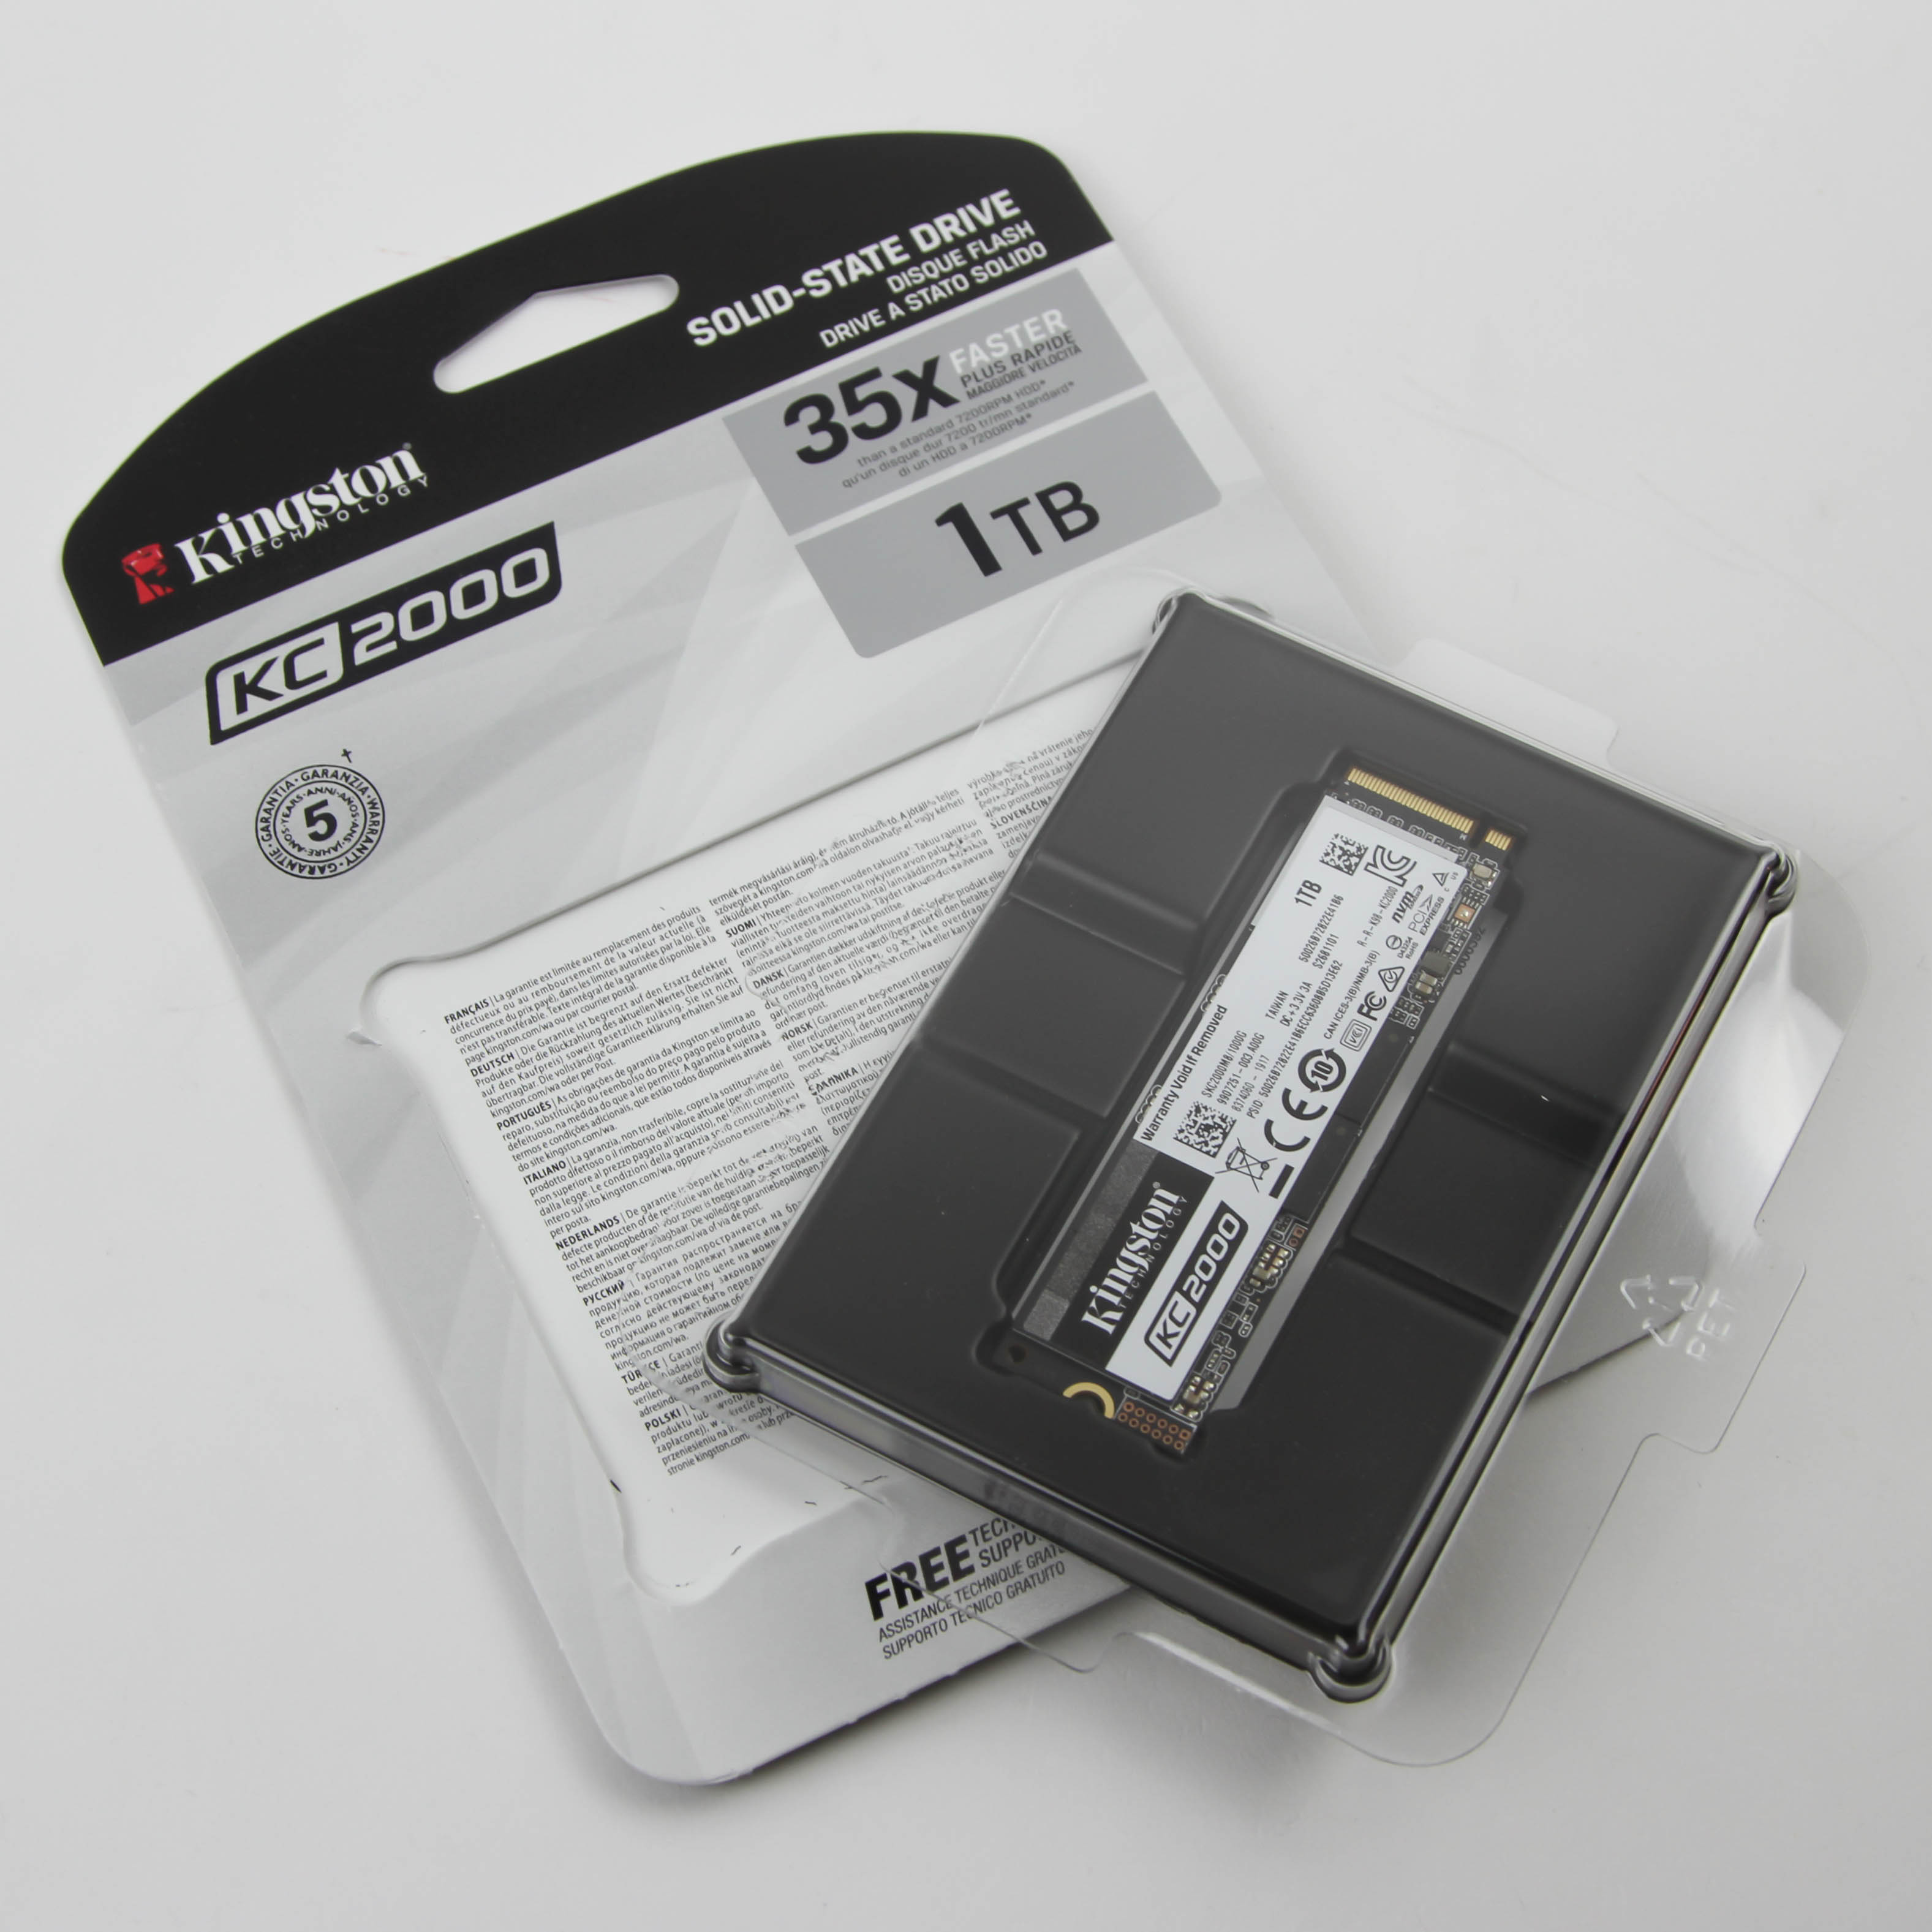 Portable Encrypted Storage for the USB Interface - Kingston KC2000 + Silverstone TechPowerUp